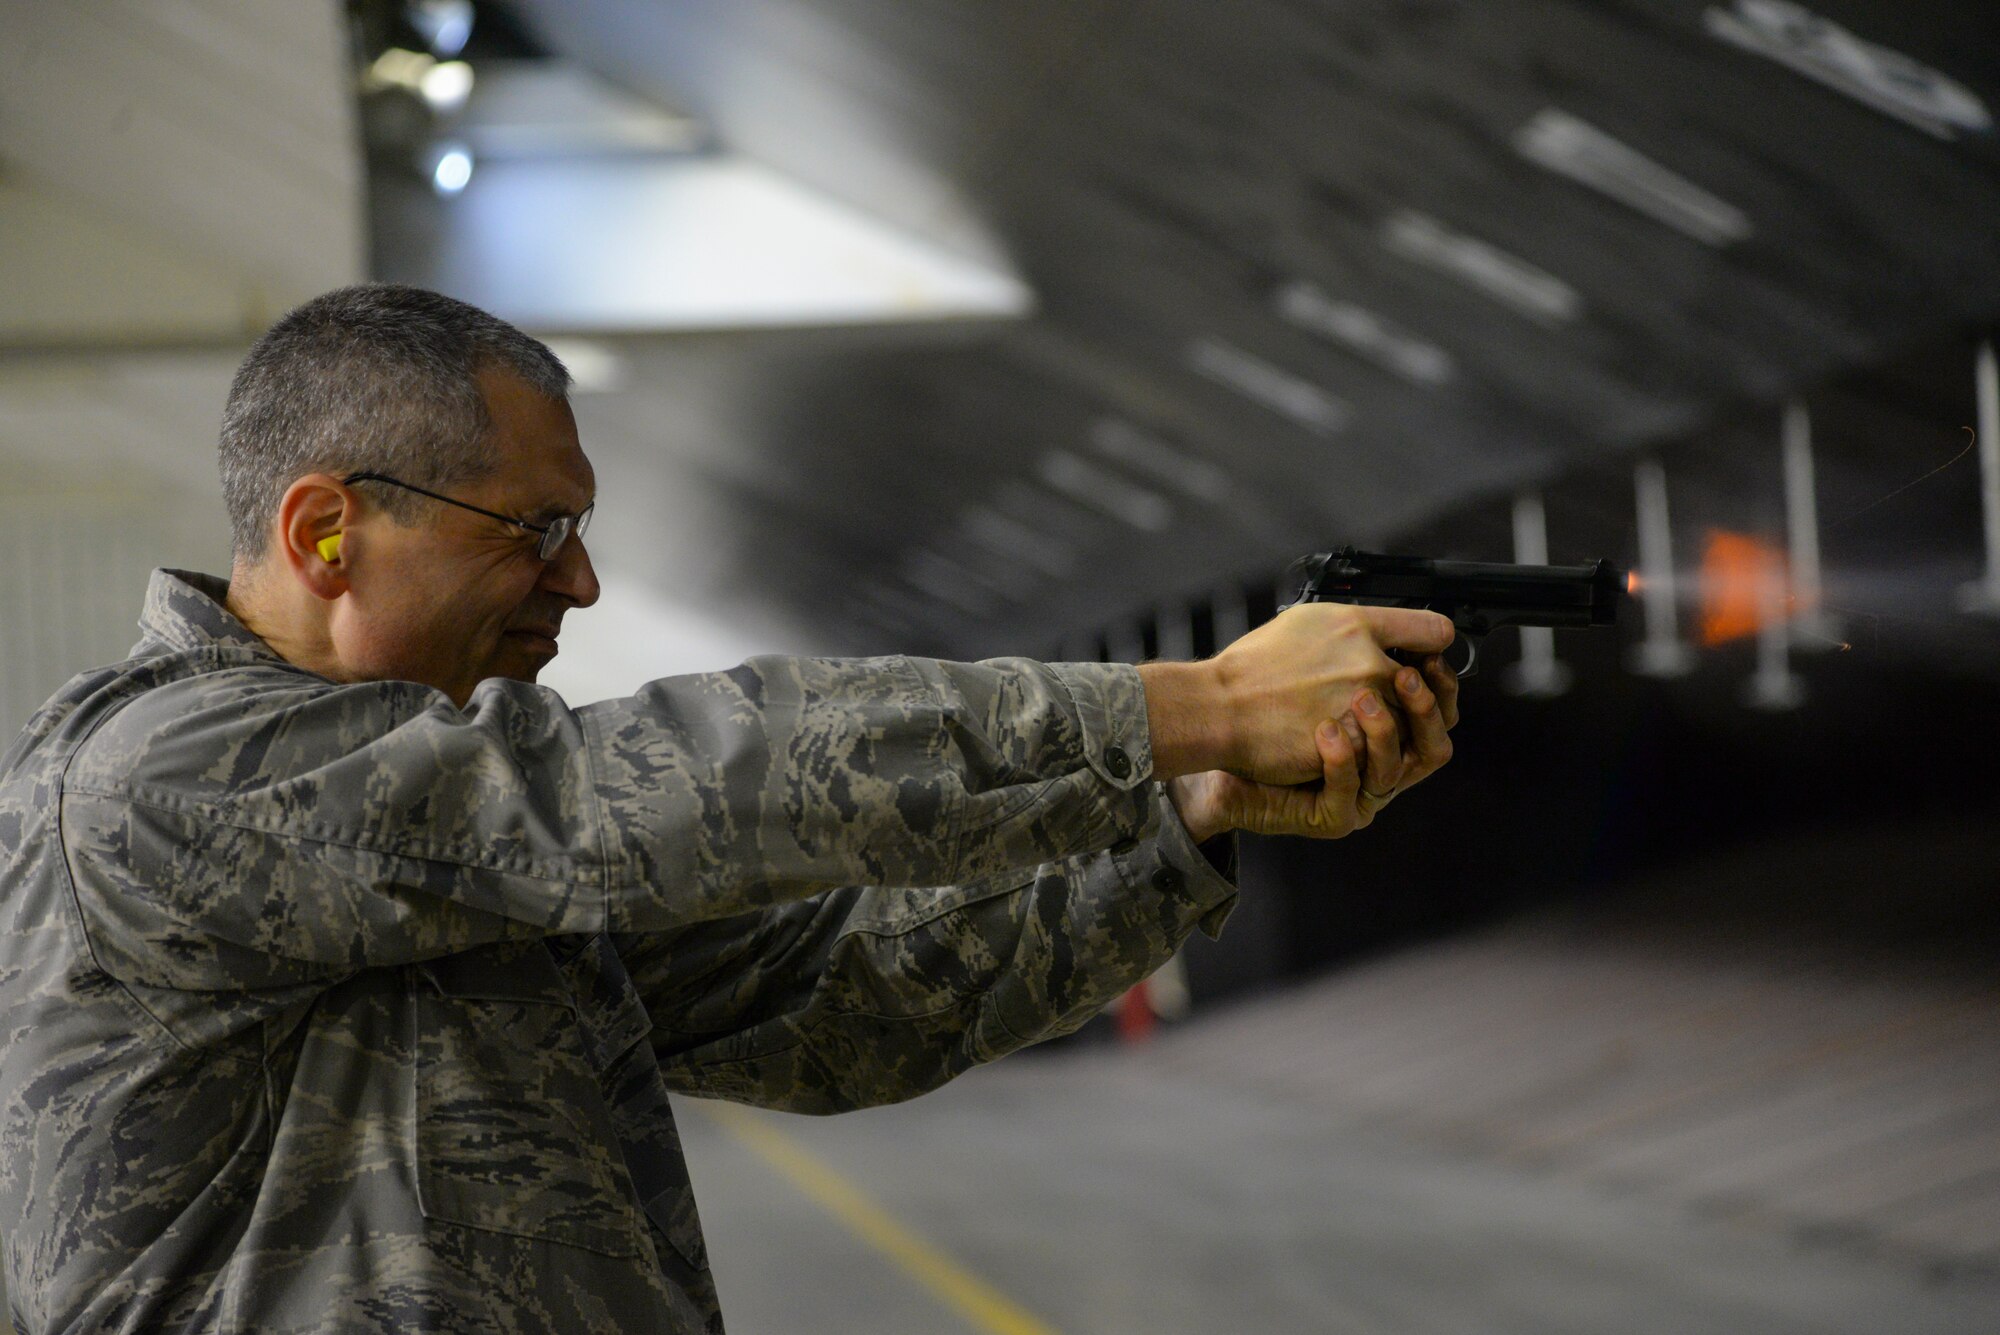 A picture of U.S. Air Force Lieutenant Colonel Eric Erickson, 177th Medical Group commander, firing the M9 pistol at a firing range.